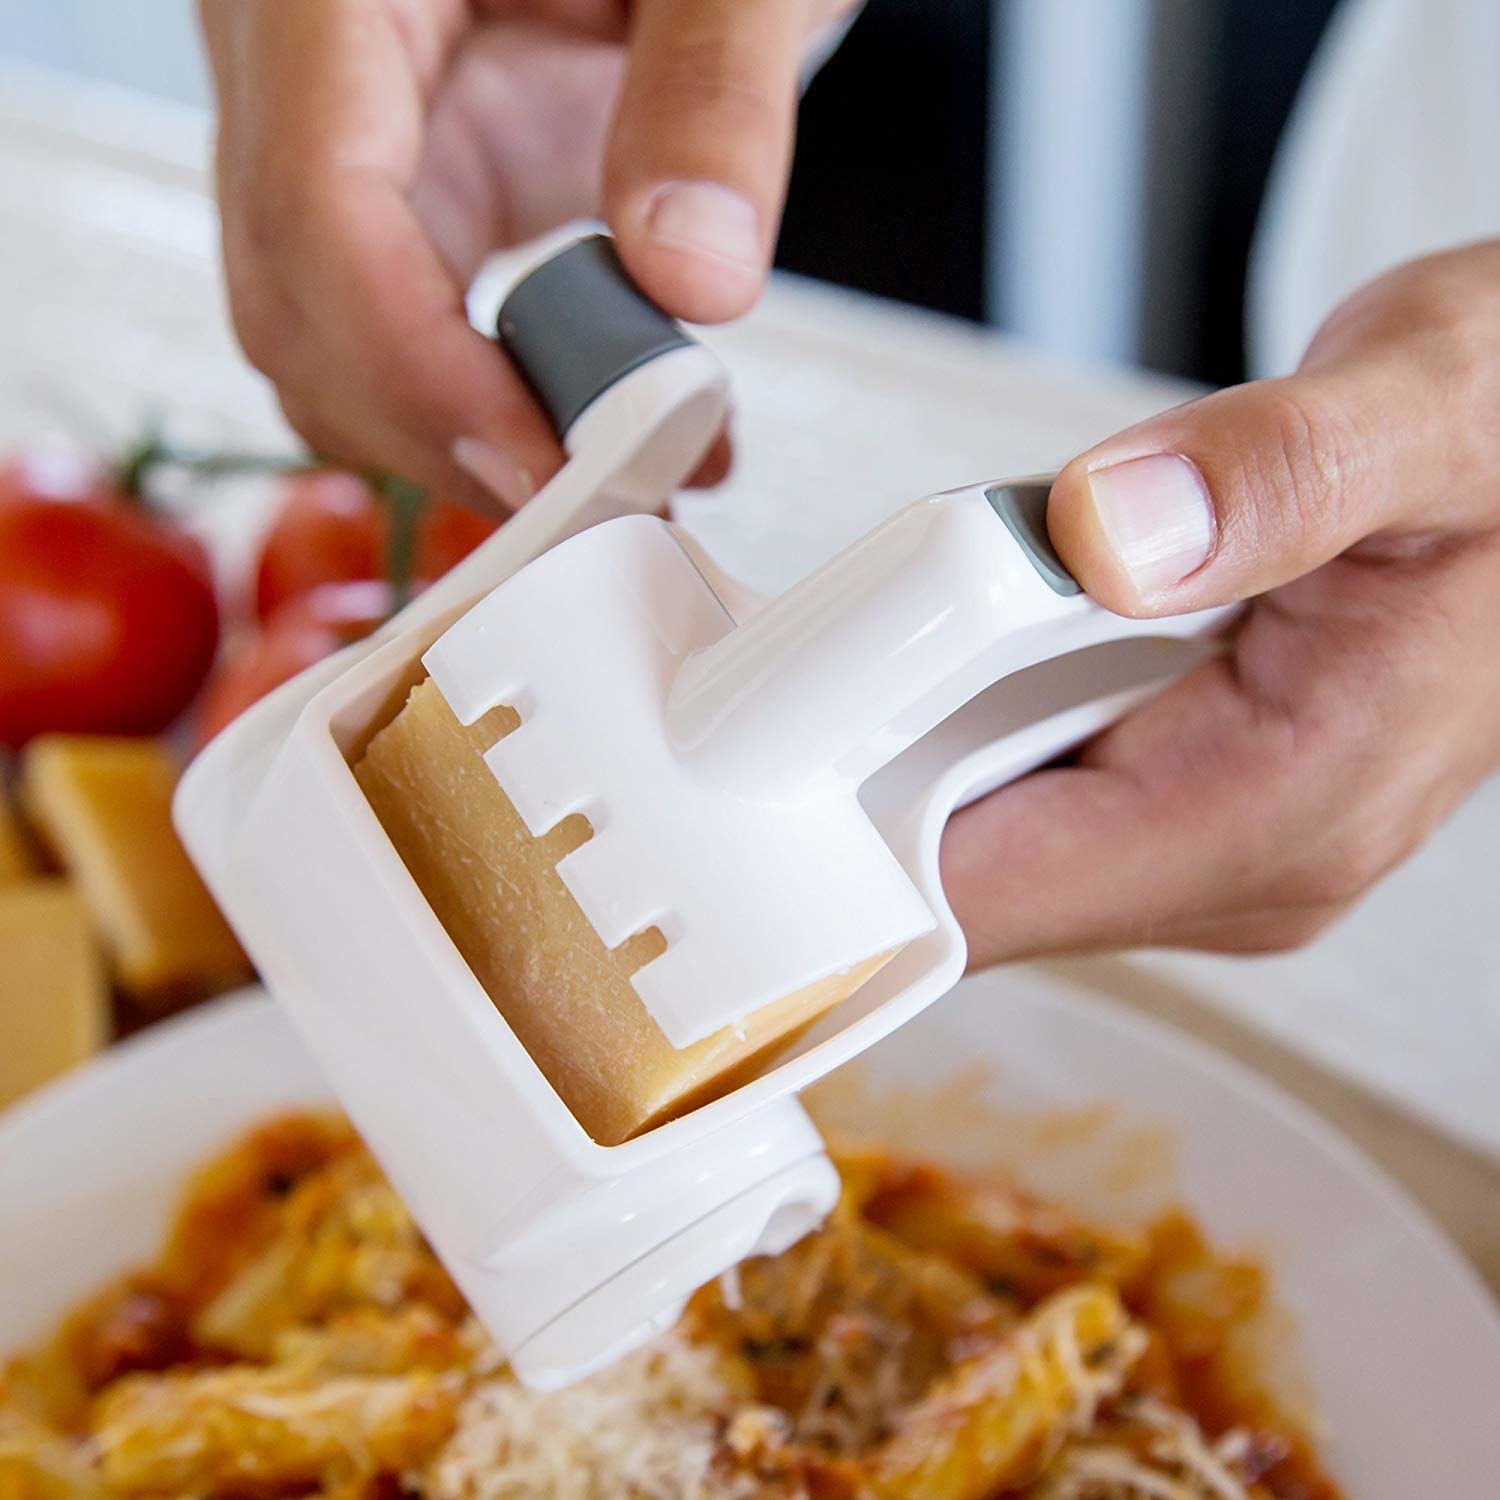 A model using the grater to put cheese on pasta